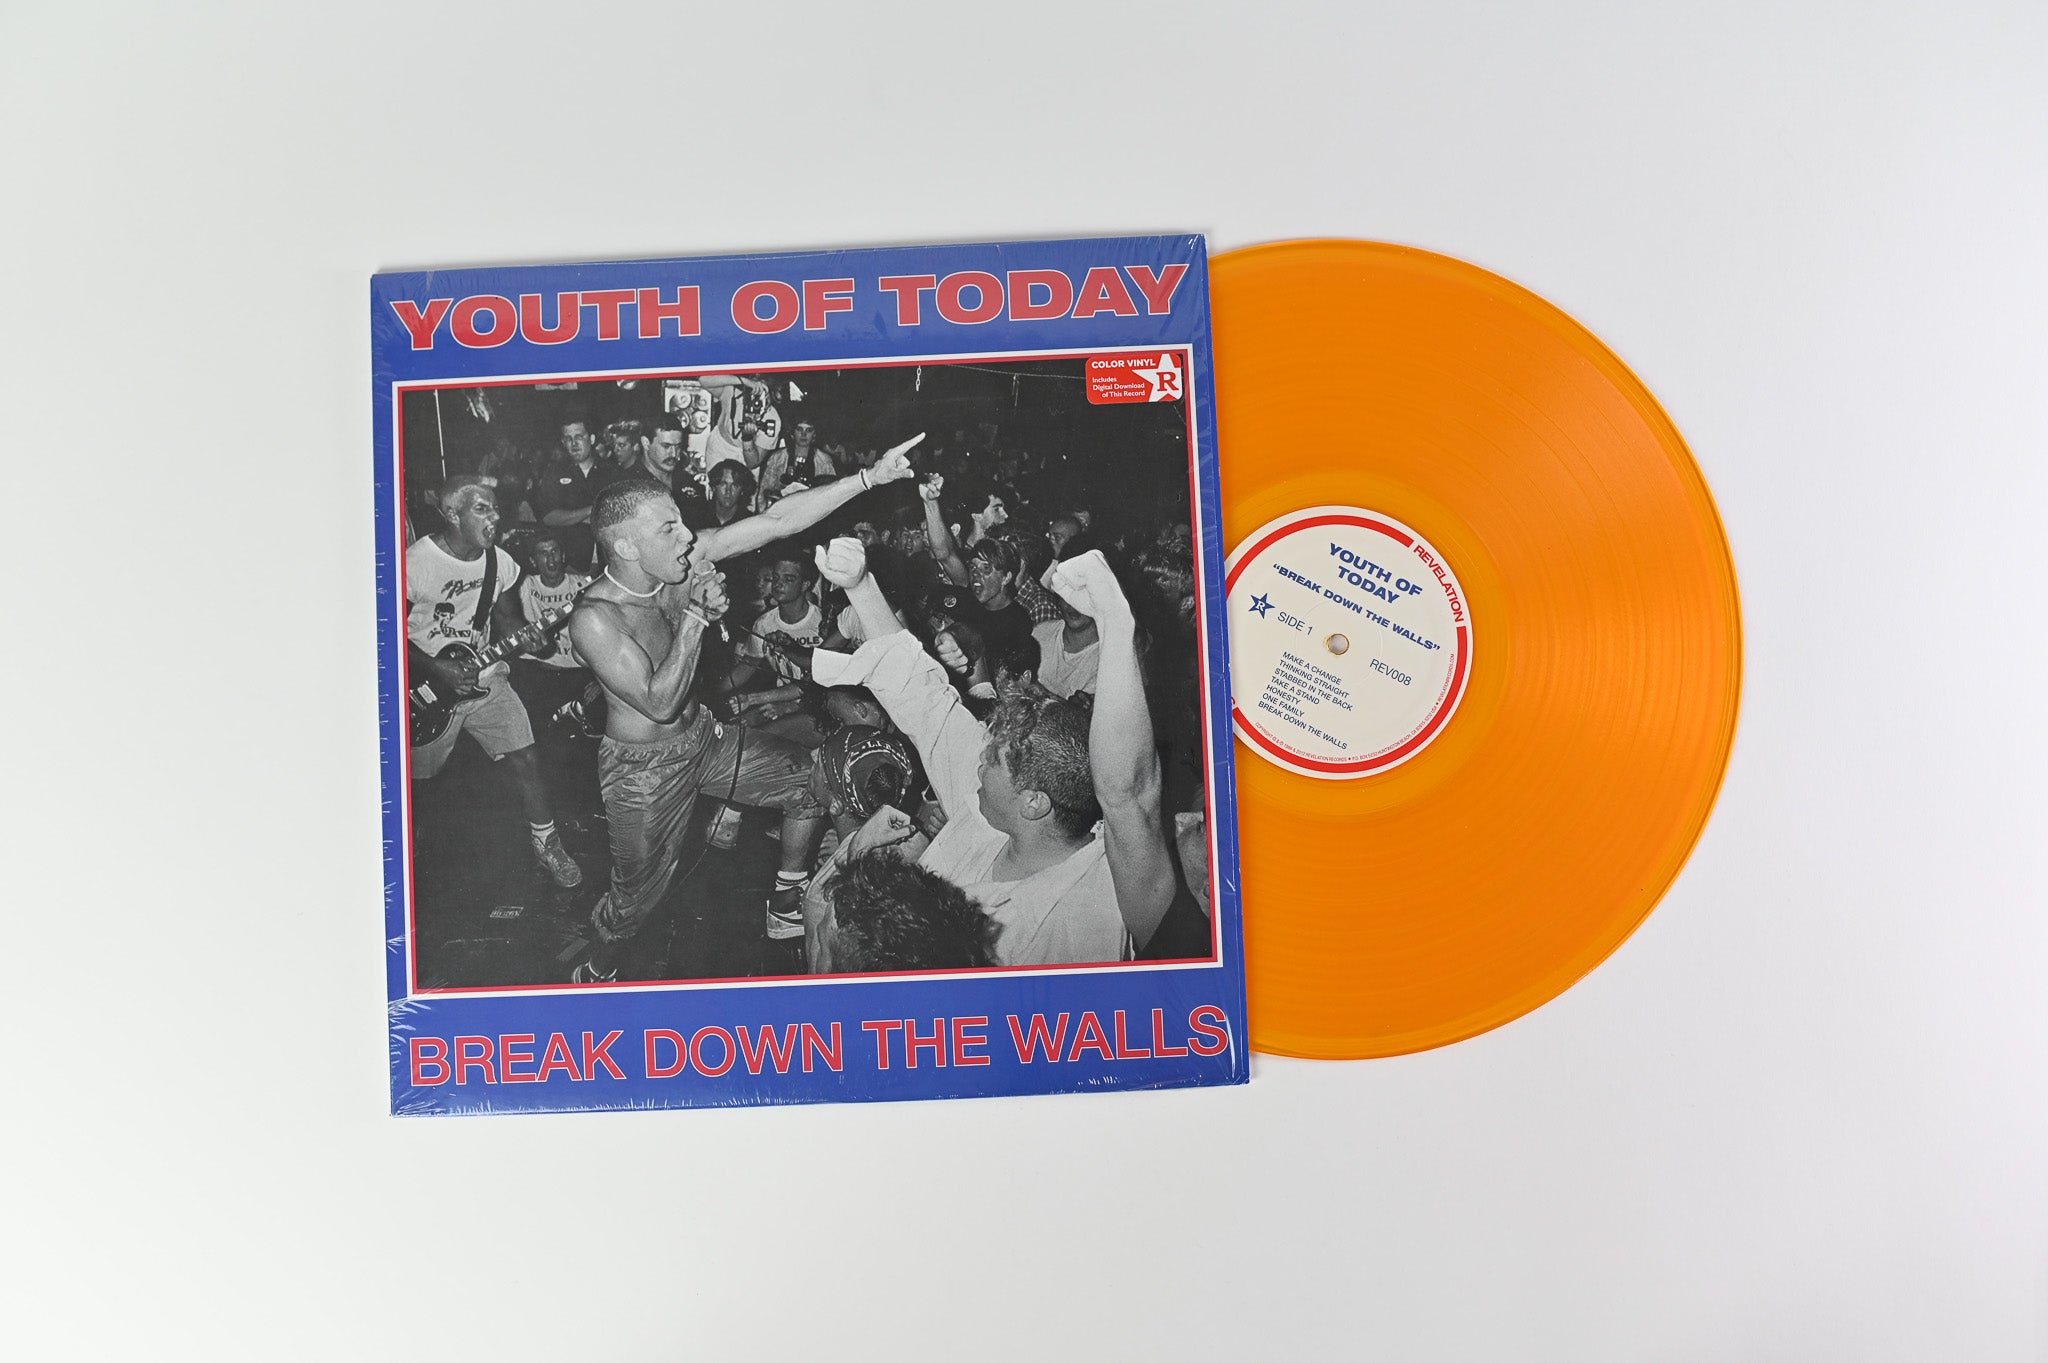 Youth Of Today - Break Down The Walls on Revelation Records - Gold Vinyl